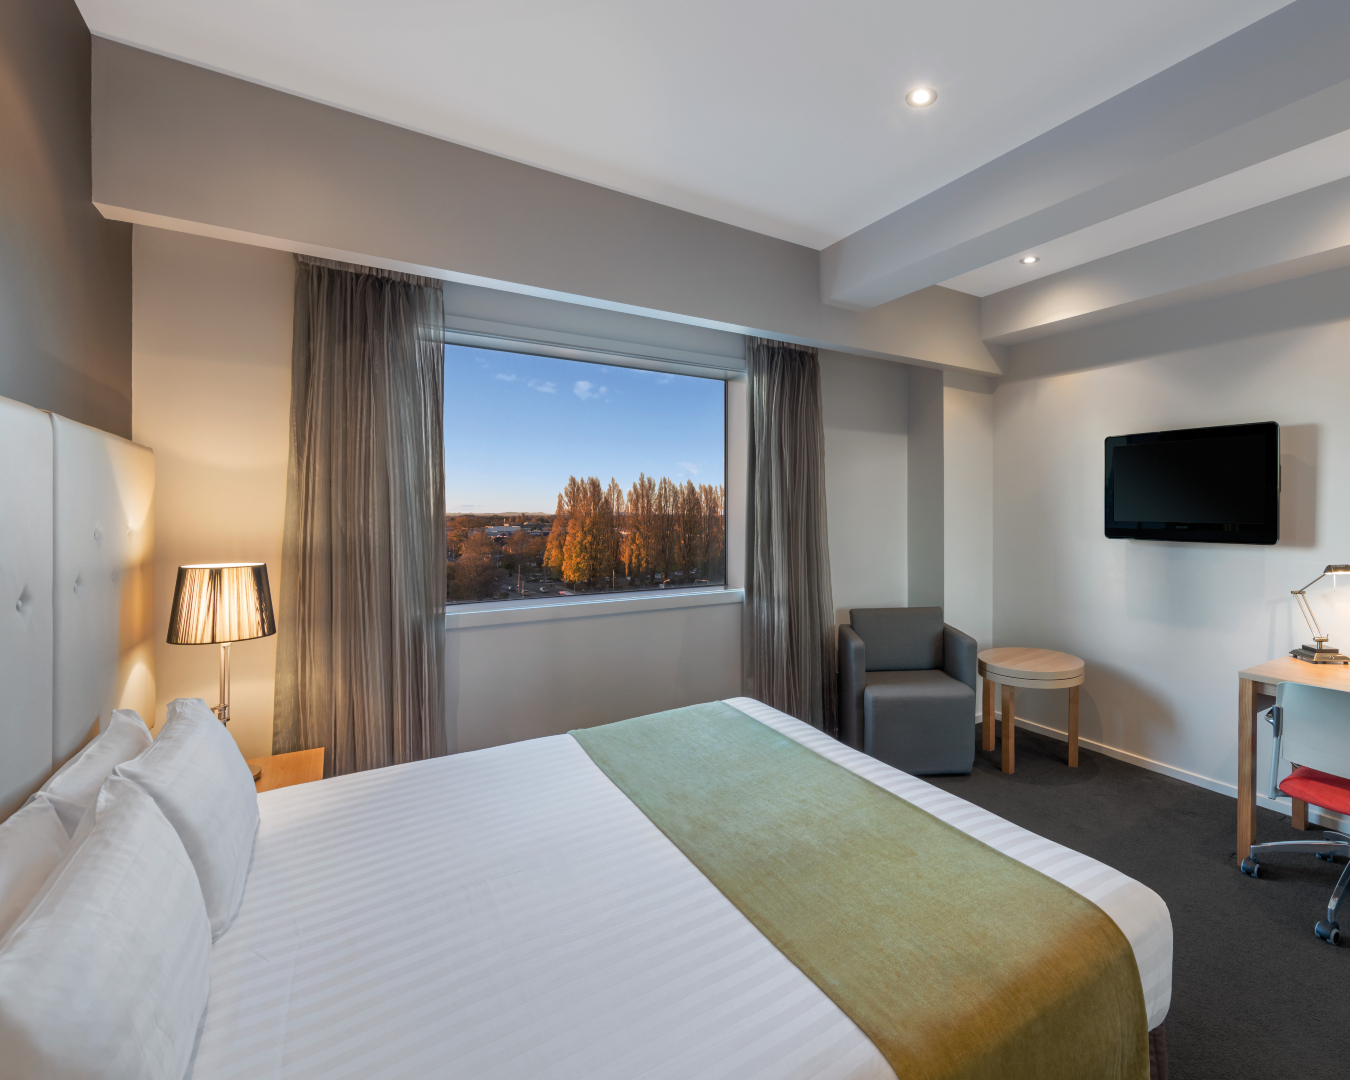 Warm and spacious, a room at Fable Christchurch offers tree-lined city views and a cosy bed